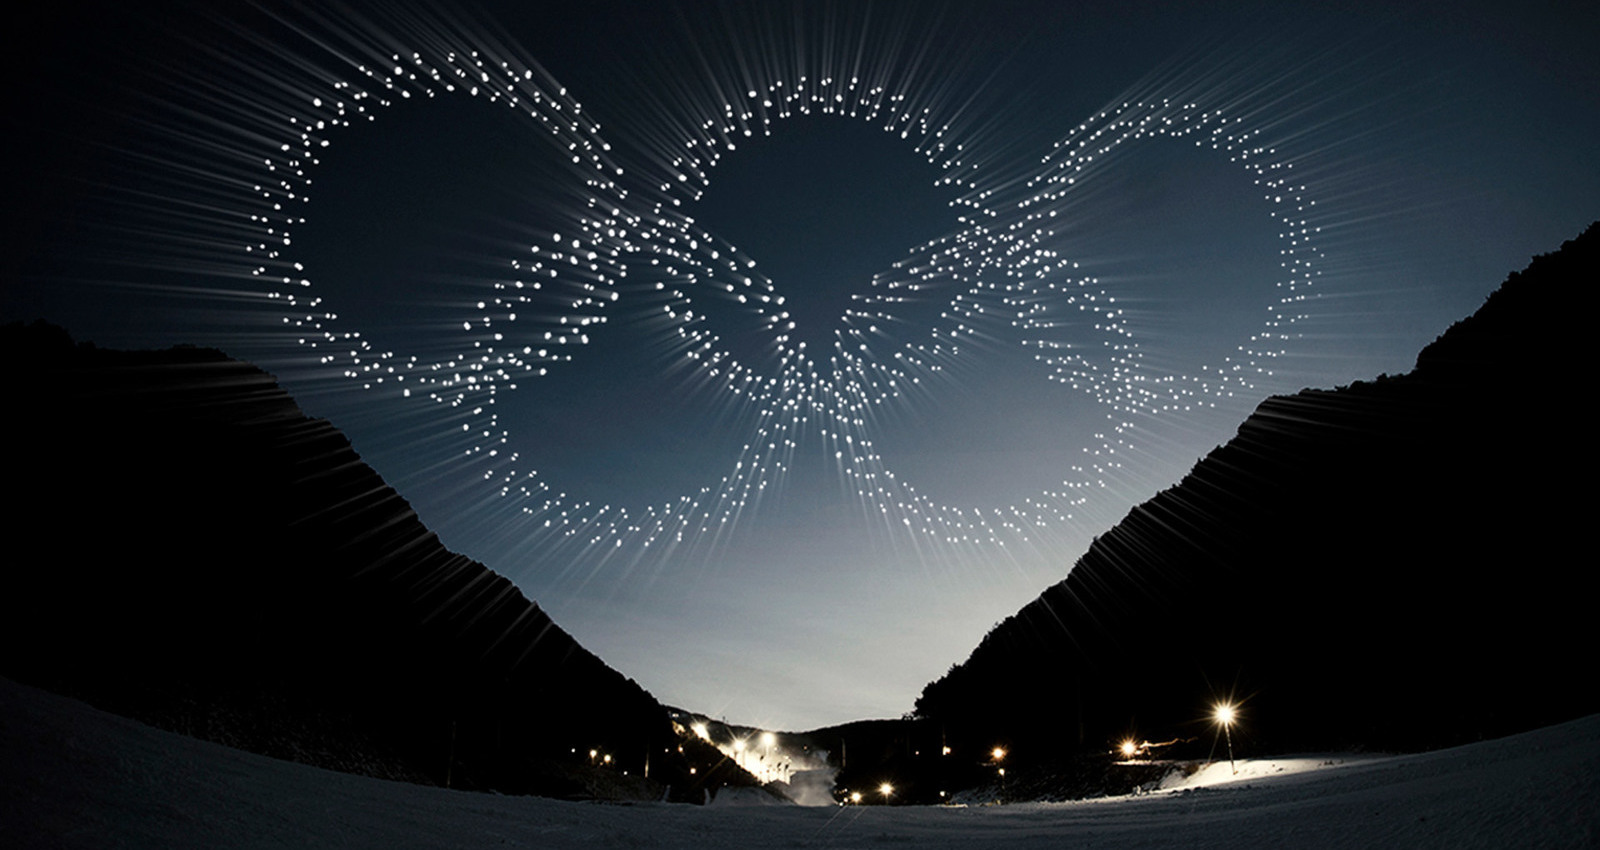 Intel Drone Light Show at The Olympics